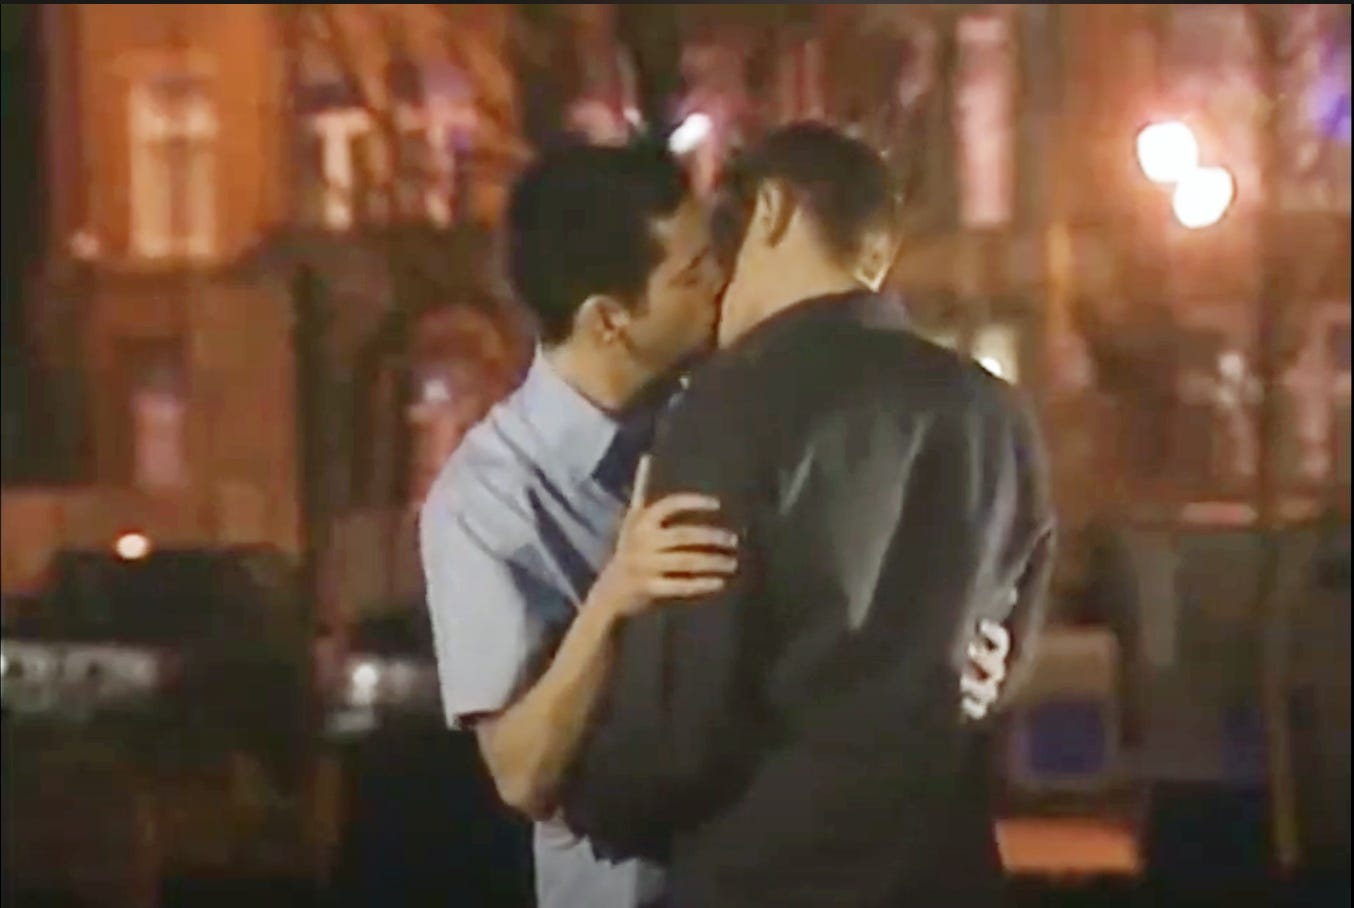 A scene from Coronation Street, Todd and Karl have their first kiss on canal street at night time